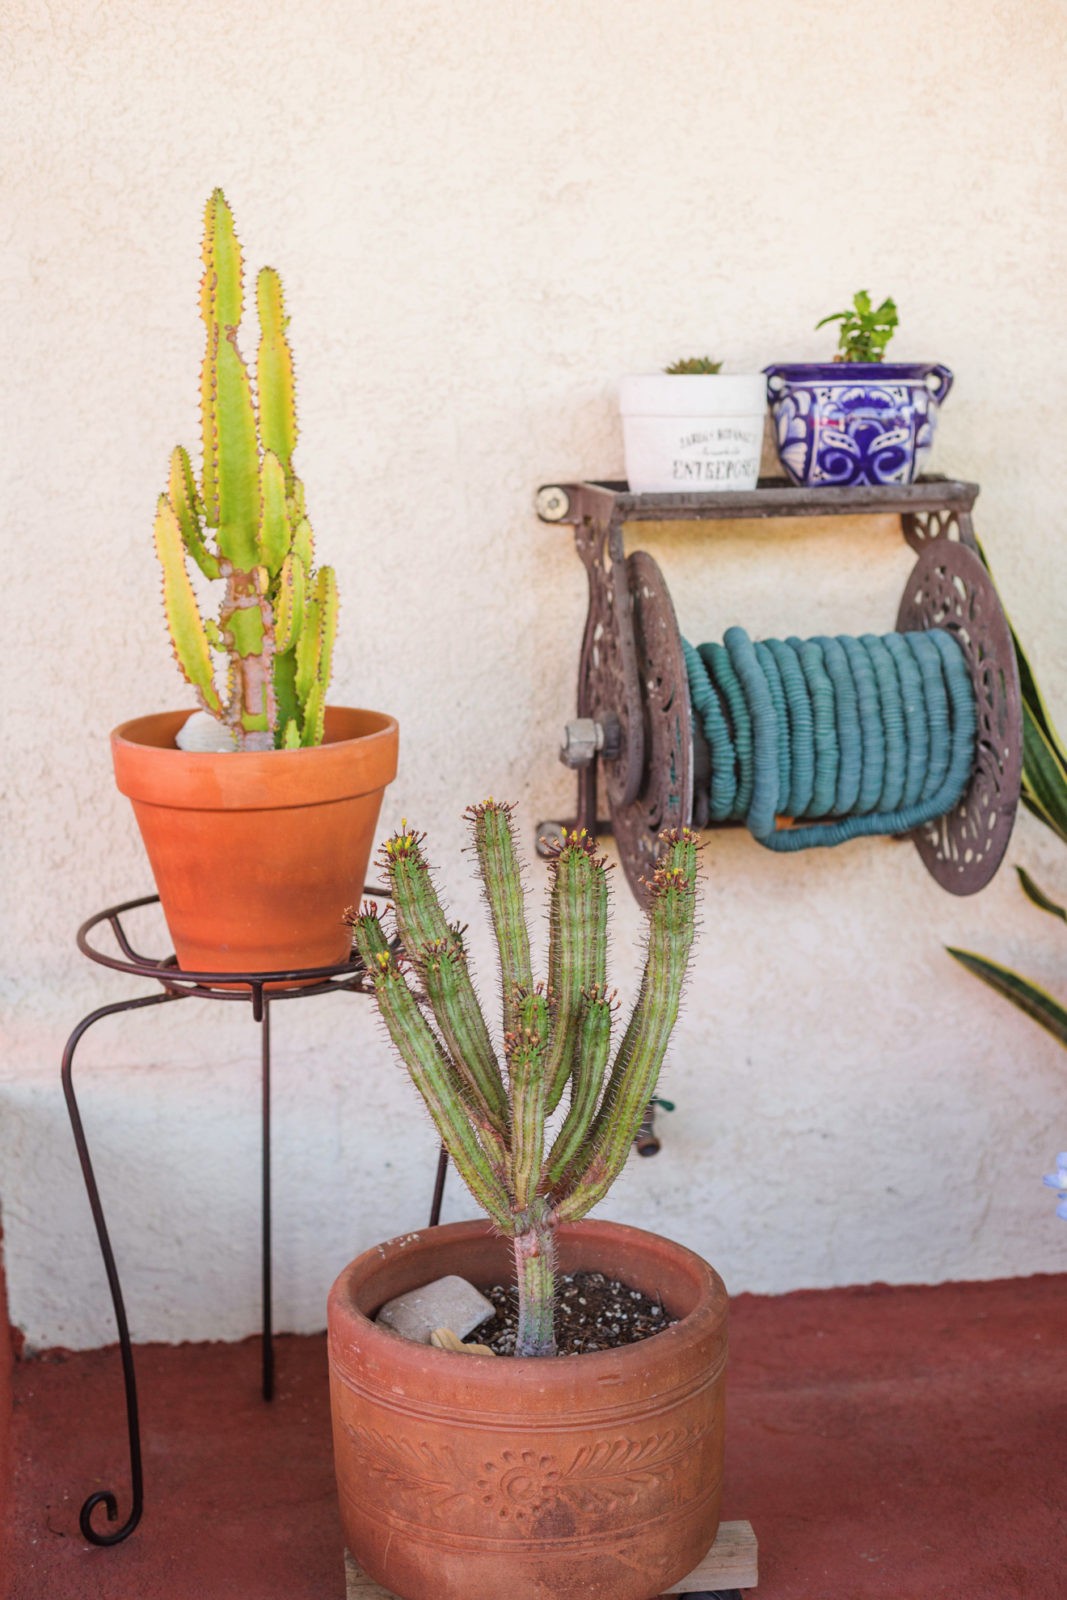 Patio Decor Ideas with Bed Bath & Beyond by Home Decor Blogger Laura Lily, Patio Planter Ideas,